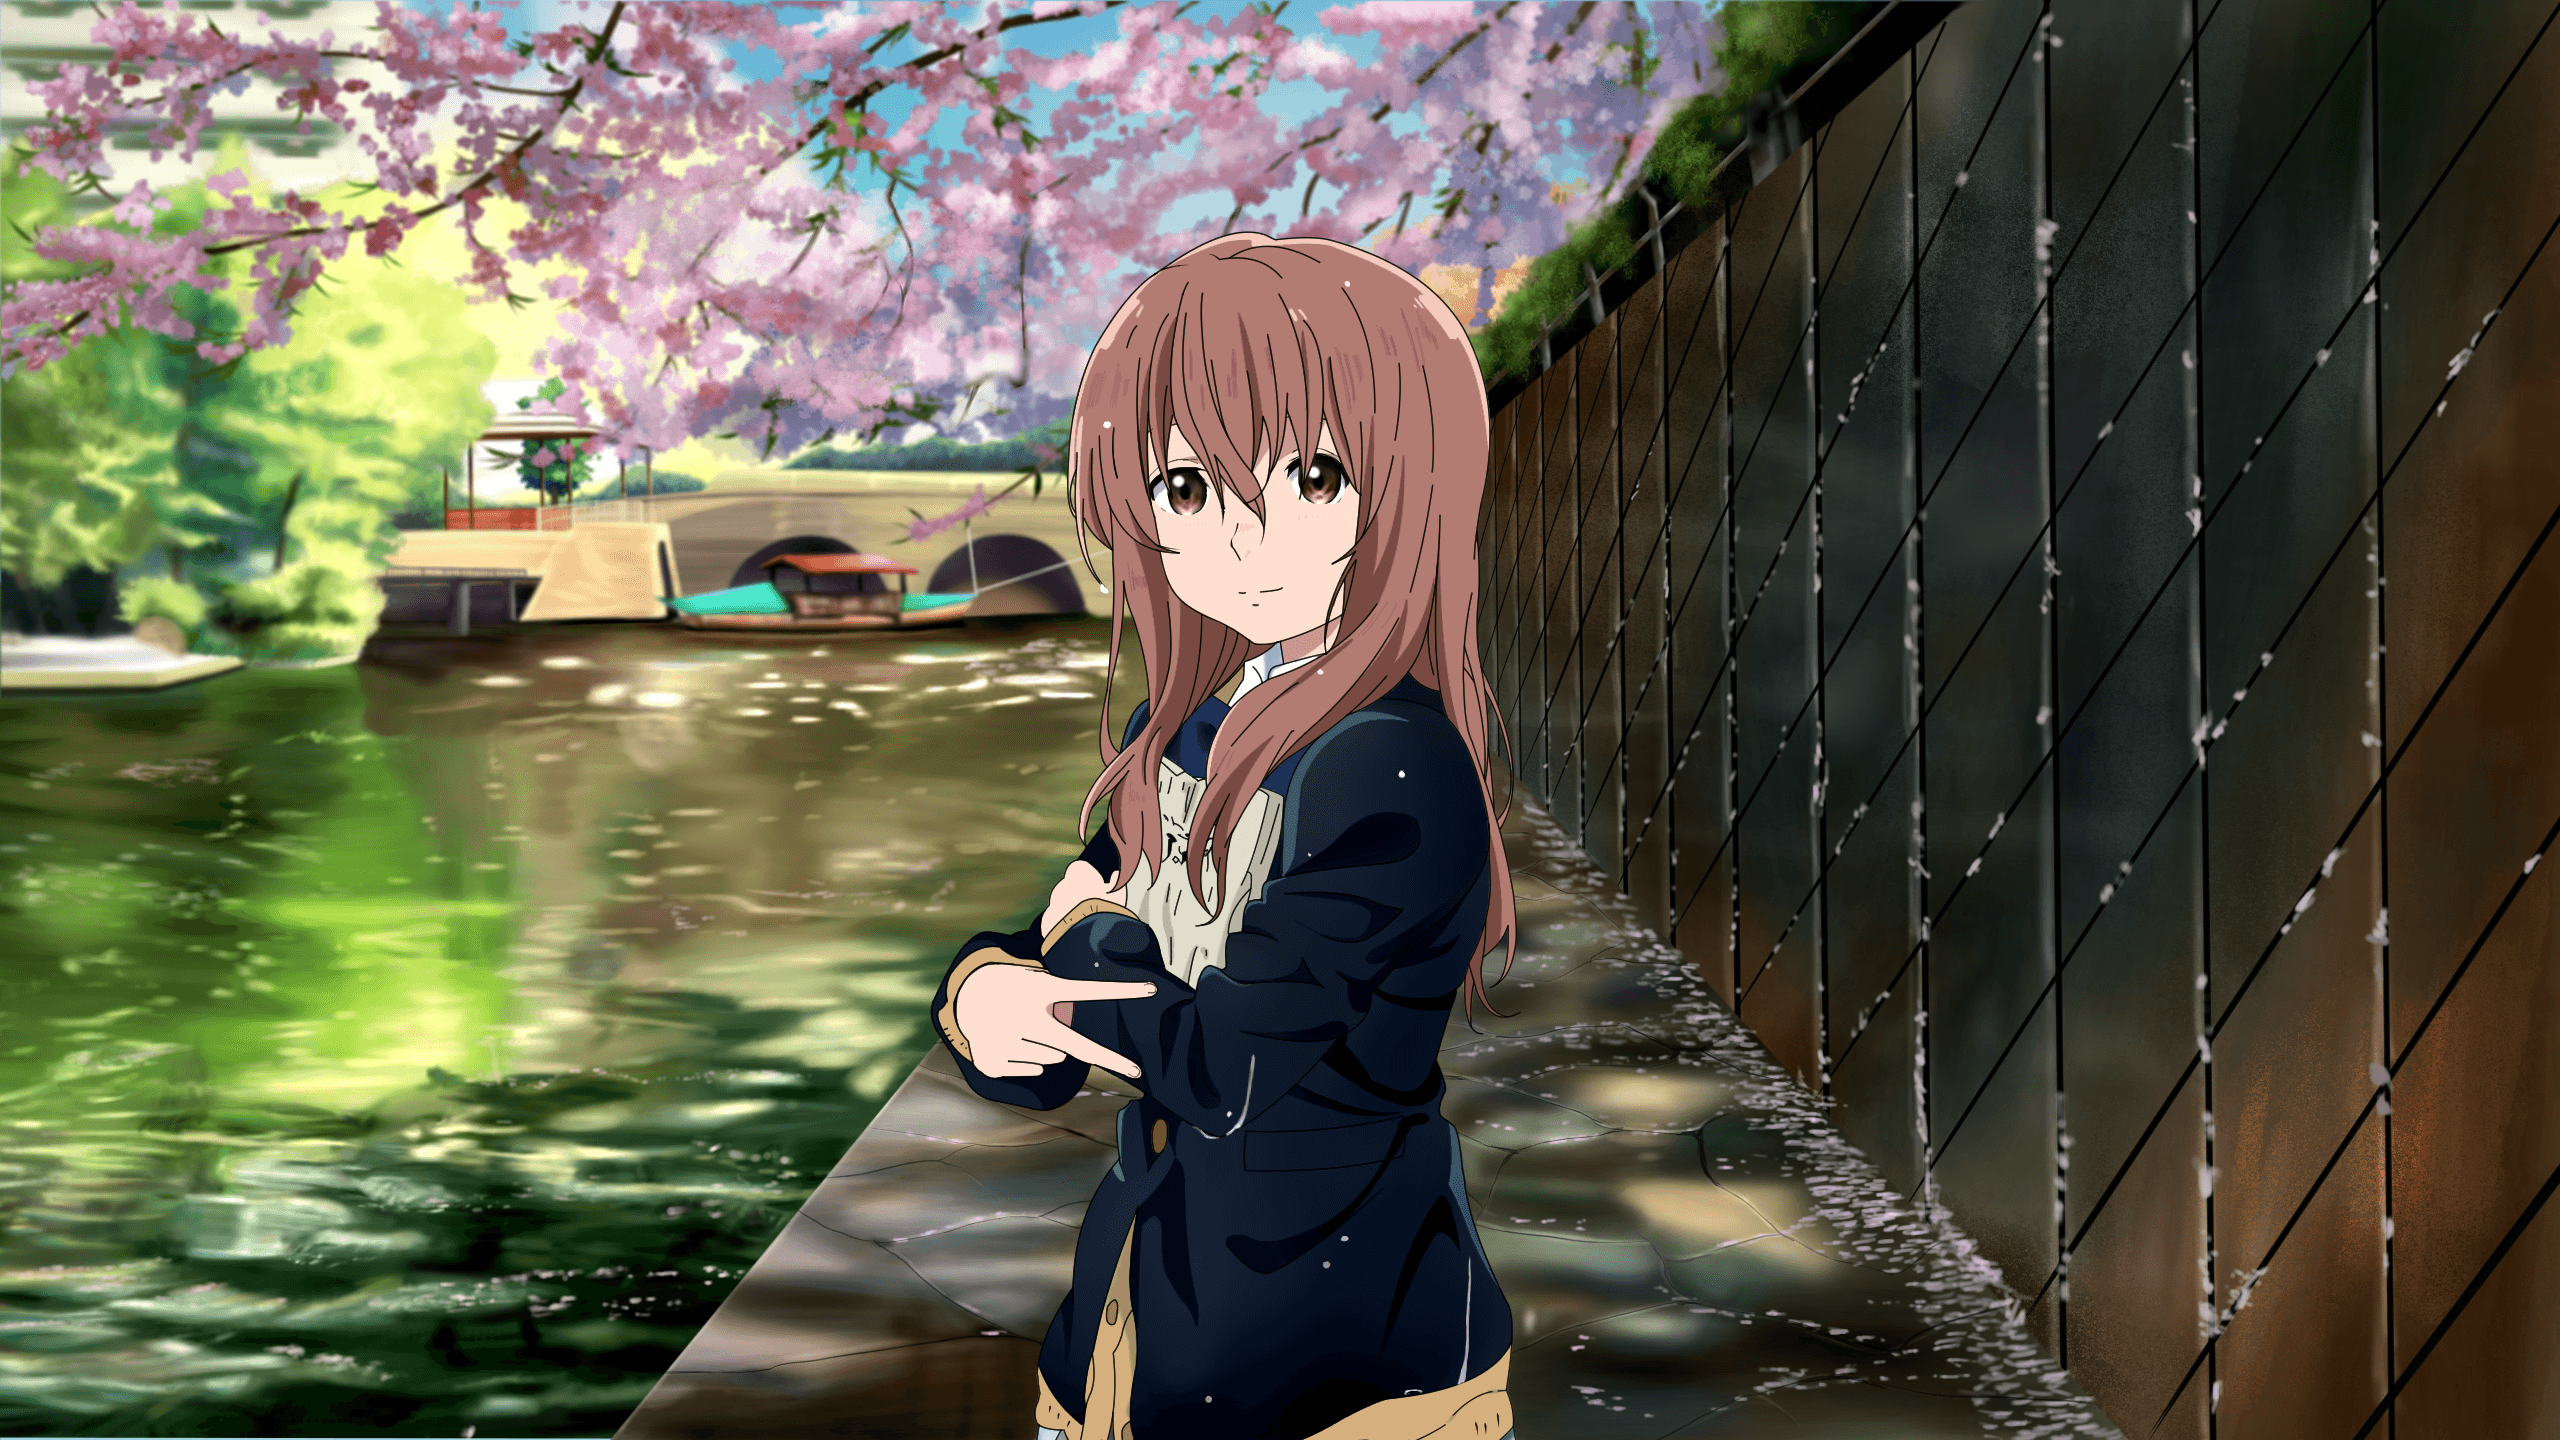 Koe no Katachi image A Silent Voice HD wallpaper and background